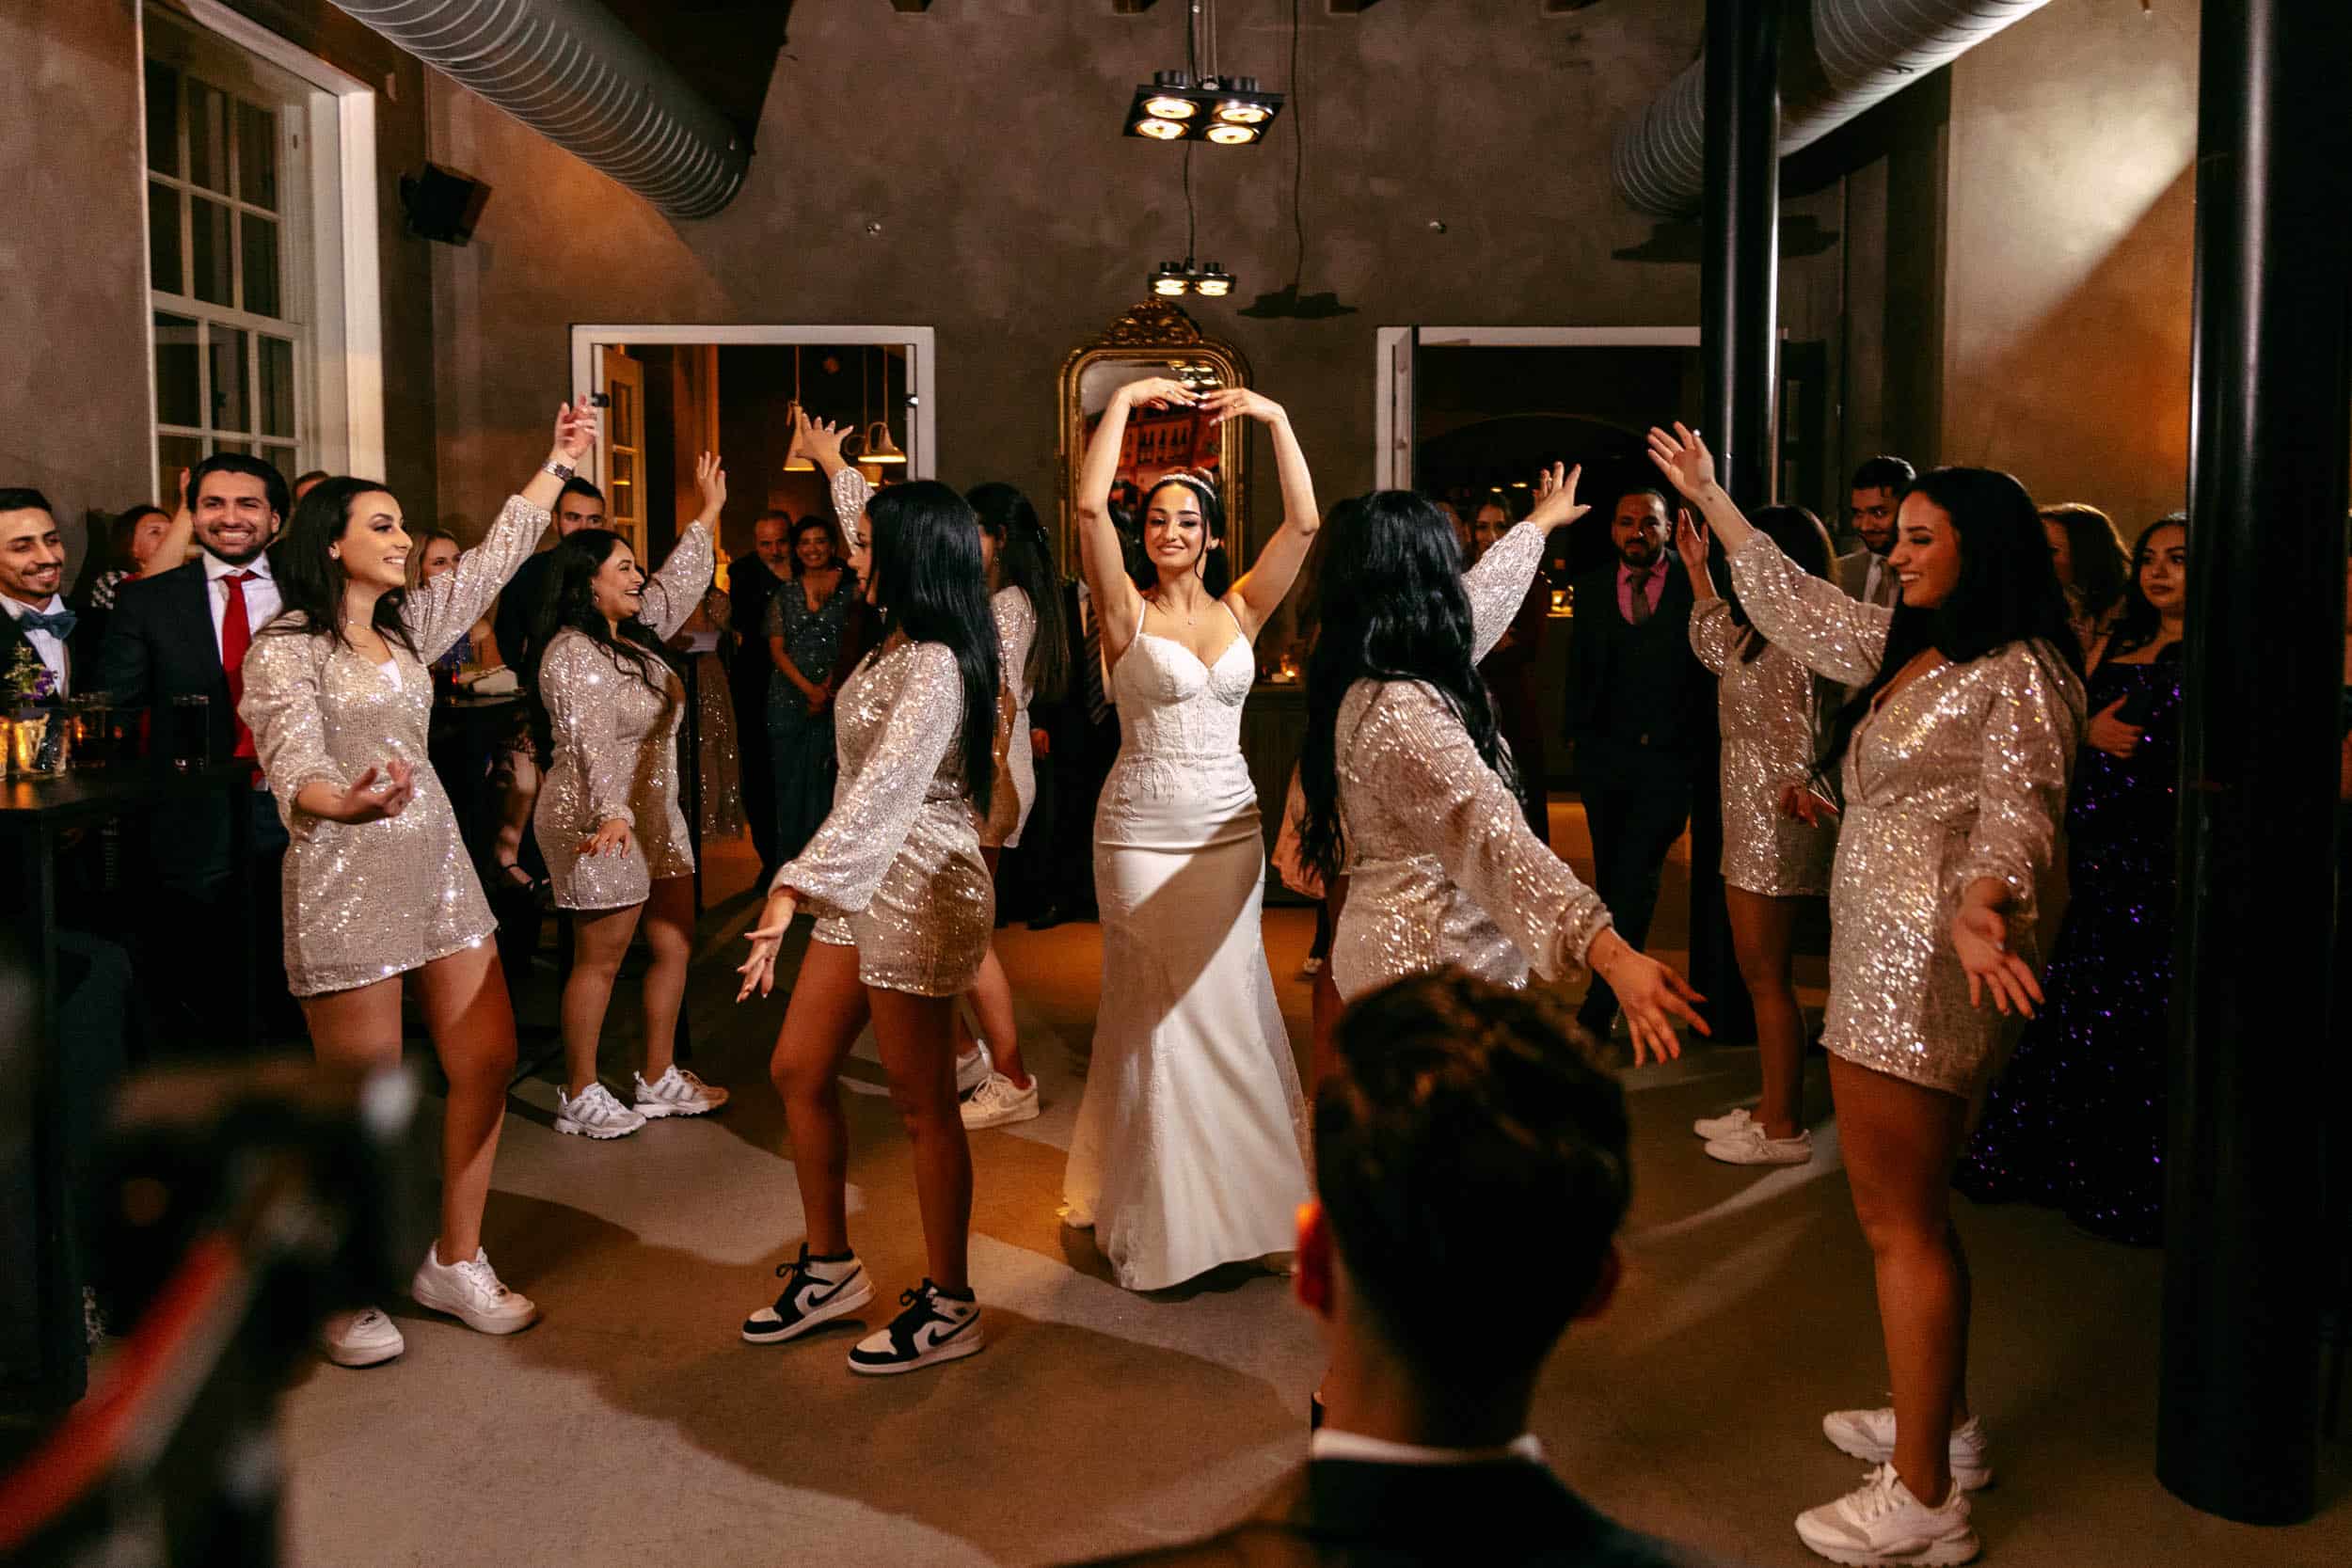 A bride and her bridesmaids dance at a wedding reception.